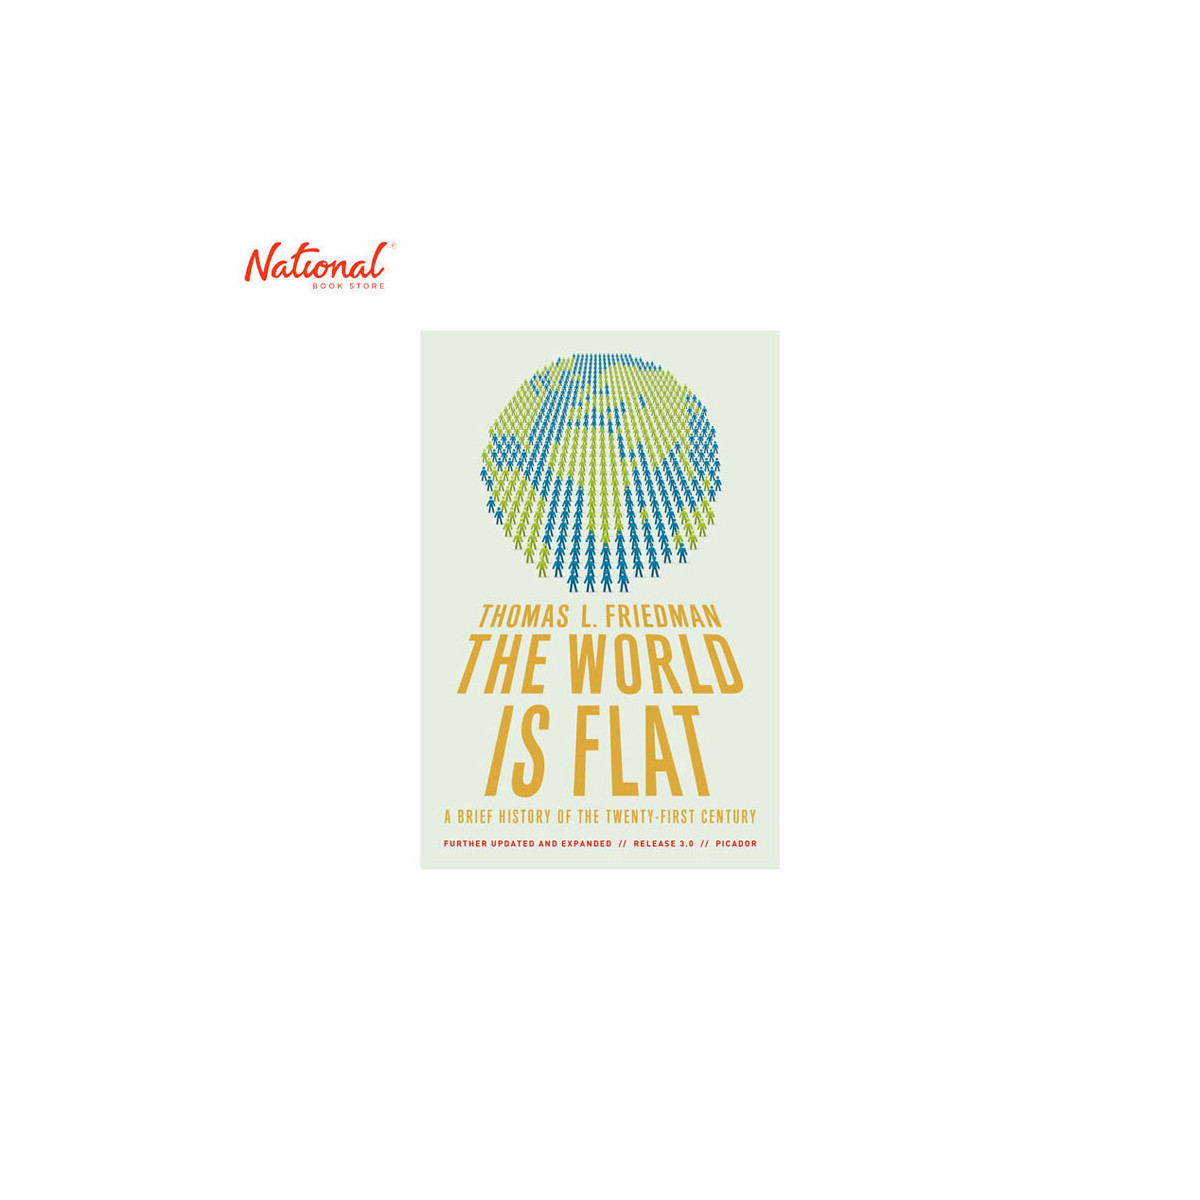 L.　WORLD　PAPERBACK　FRIEDMAN　BY　TRADE　THE　FLAT　IS　THOMAS